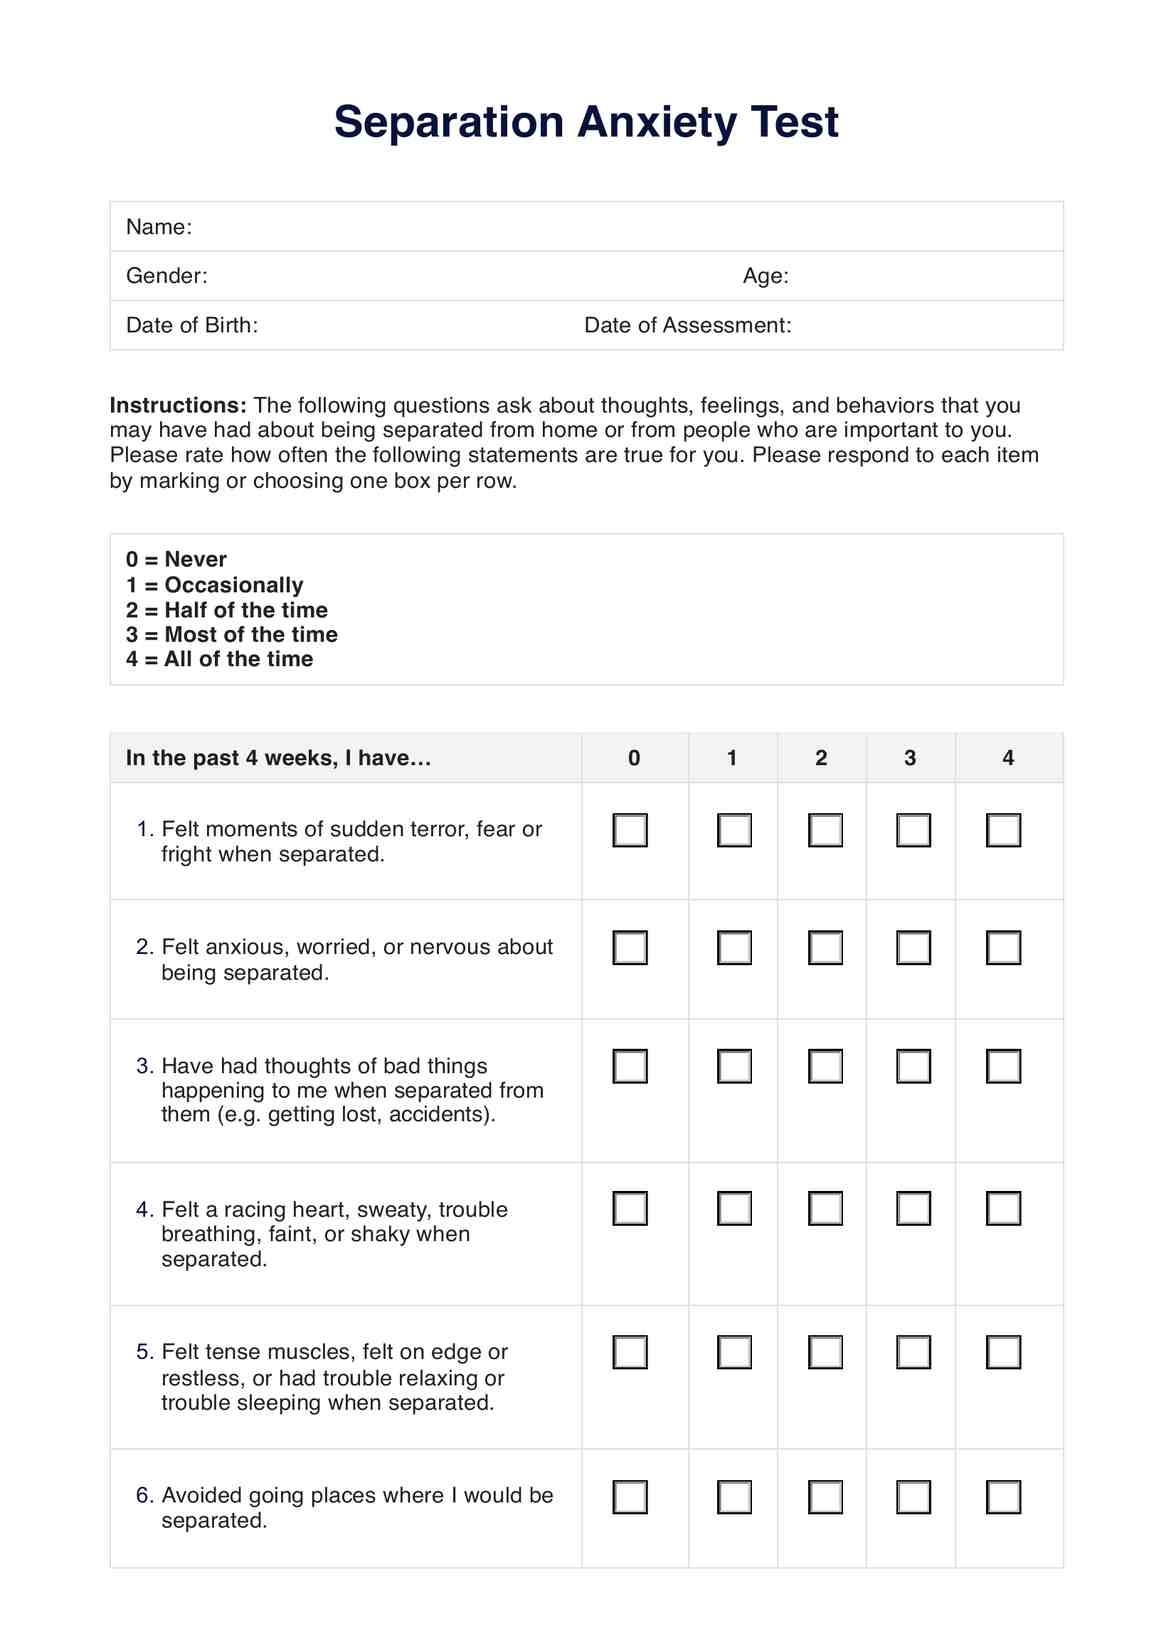 Separation Anxiety Test PDF Example